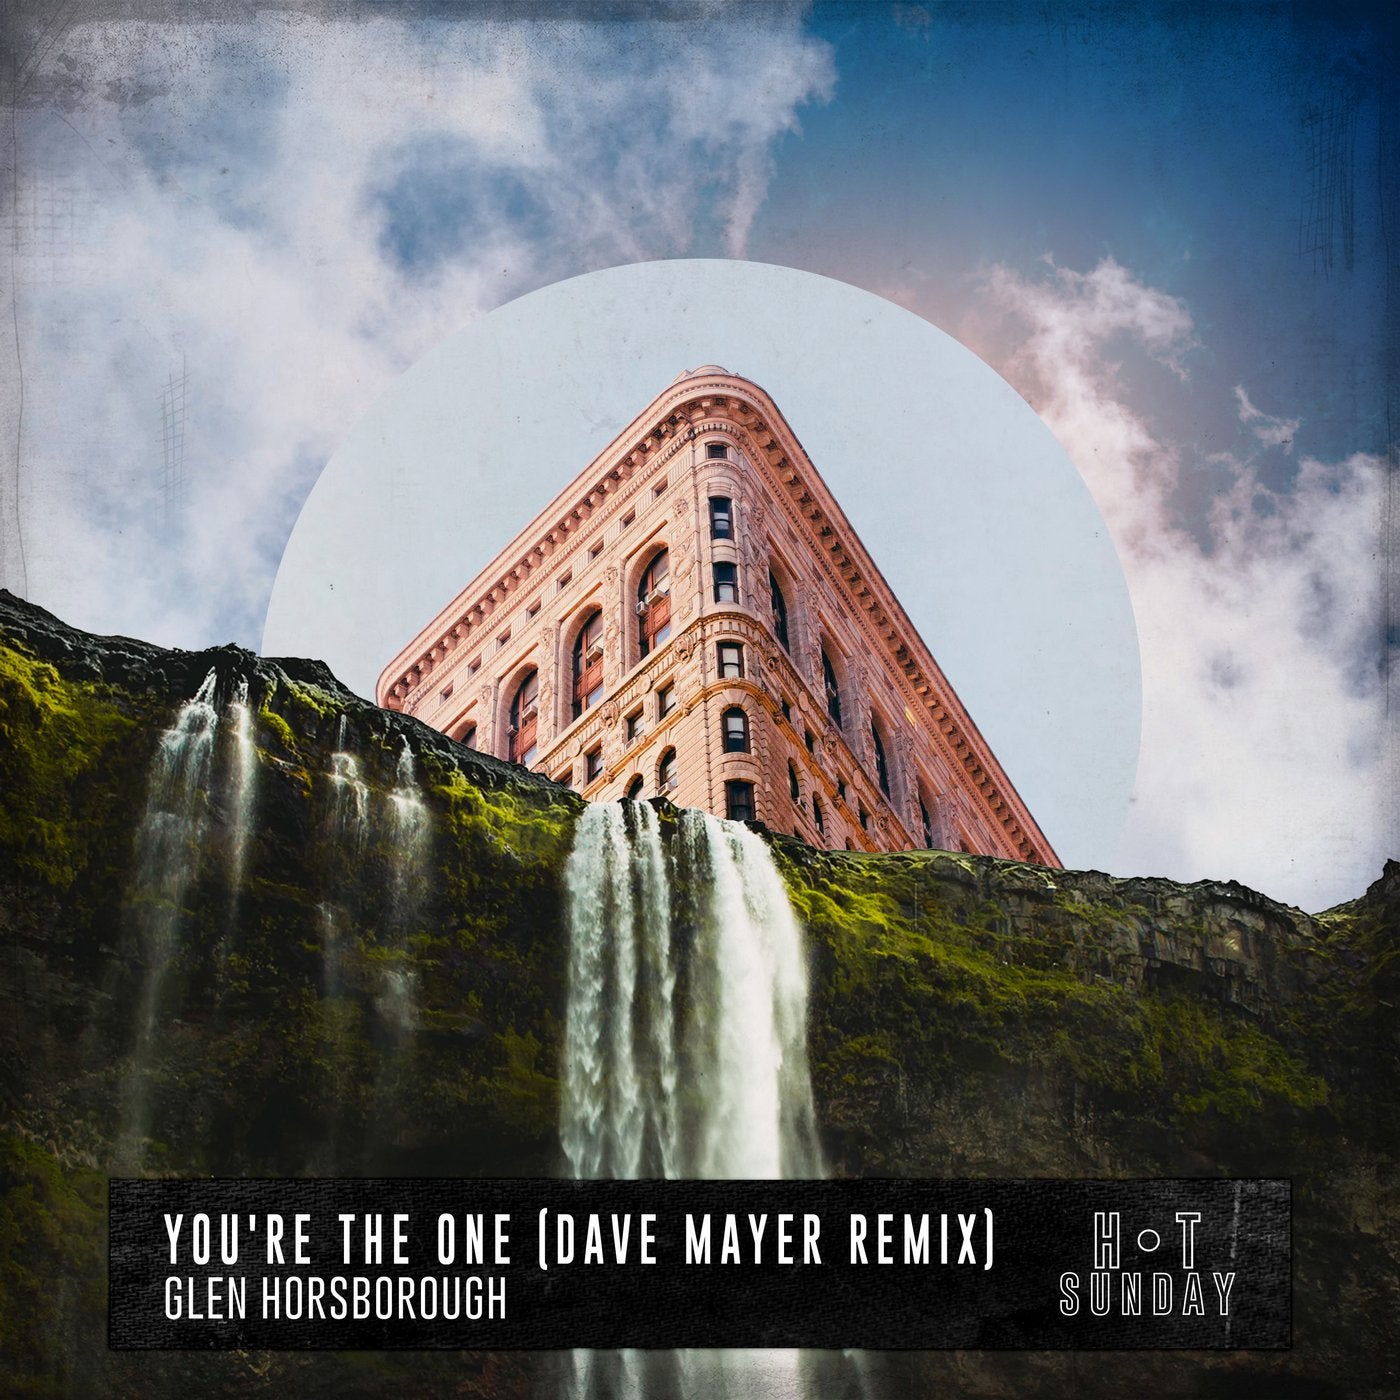 You're the One (Dave Mayer Remix)